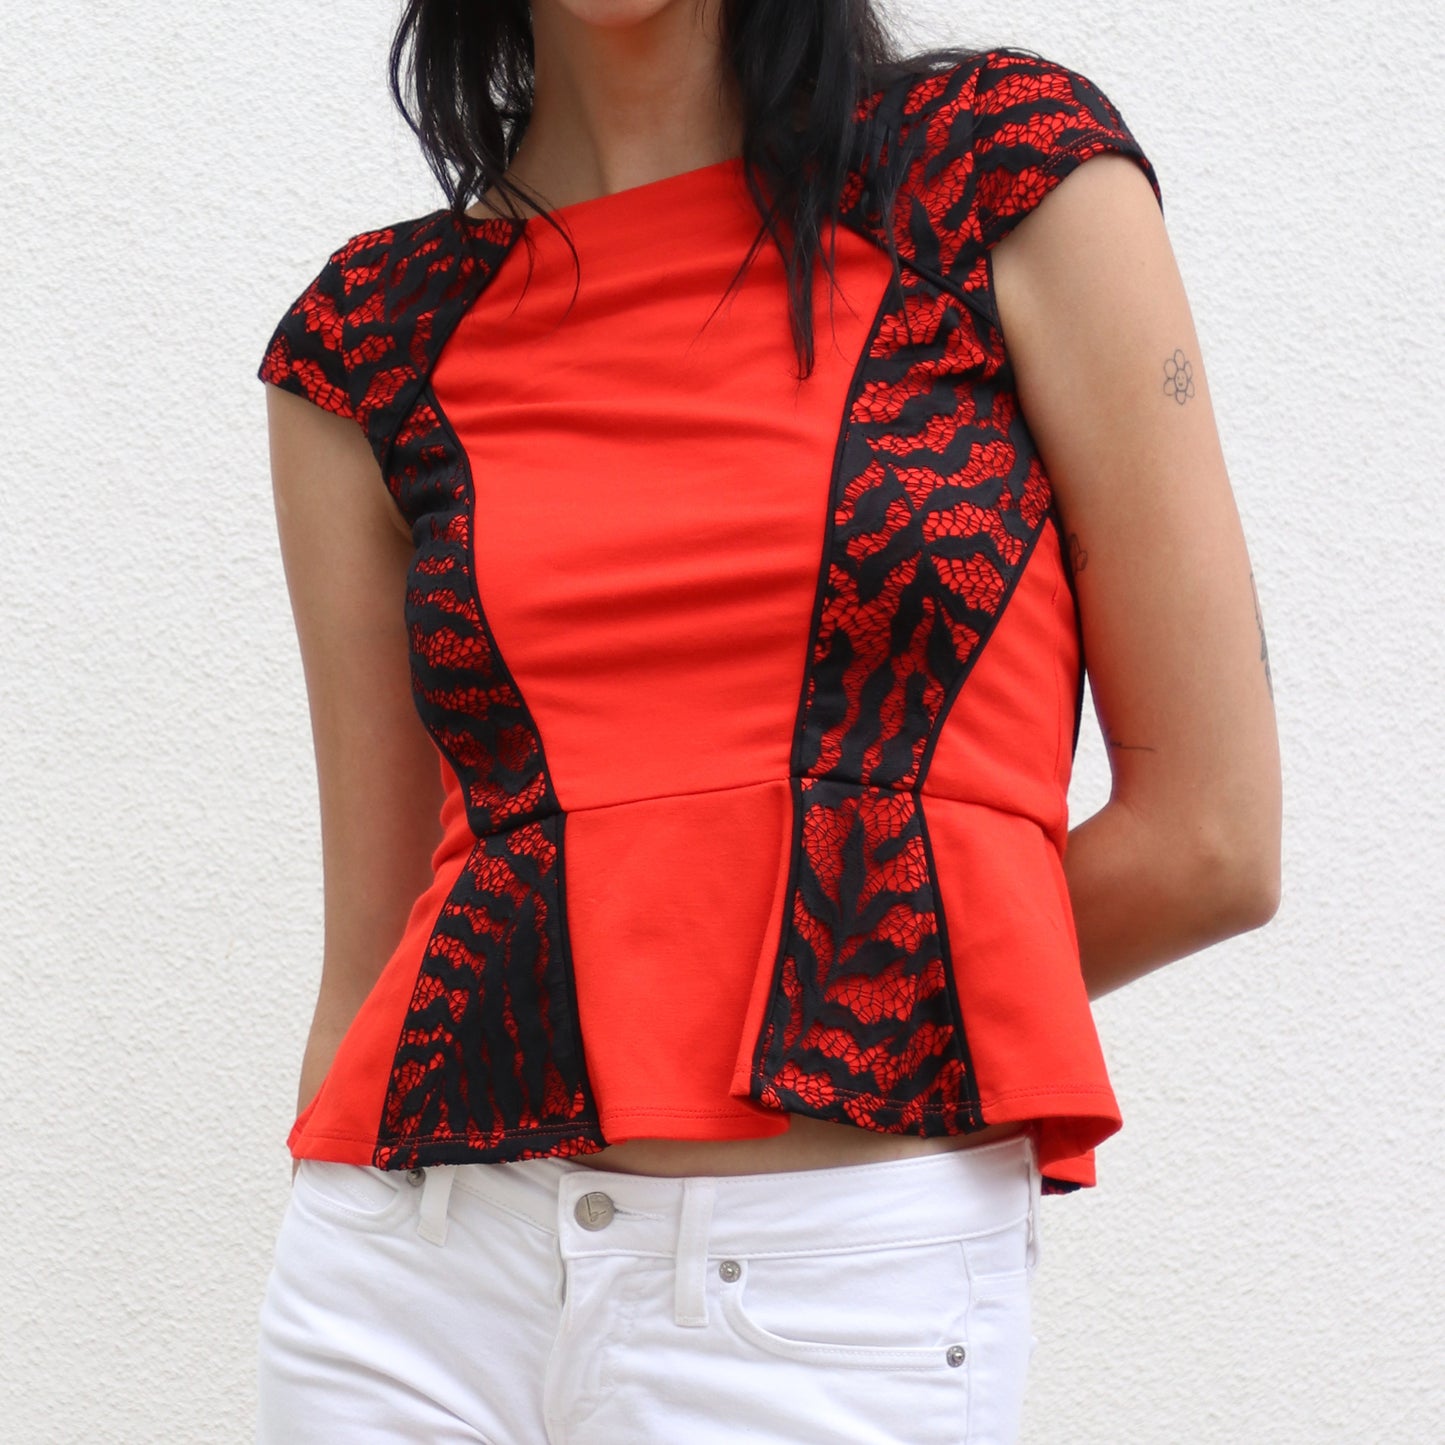 Red Bebe Top with Black Lace